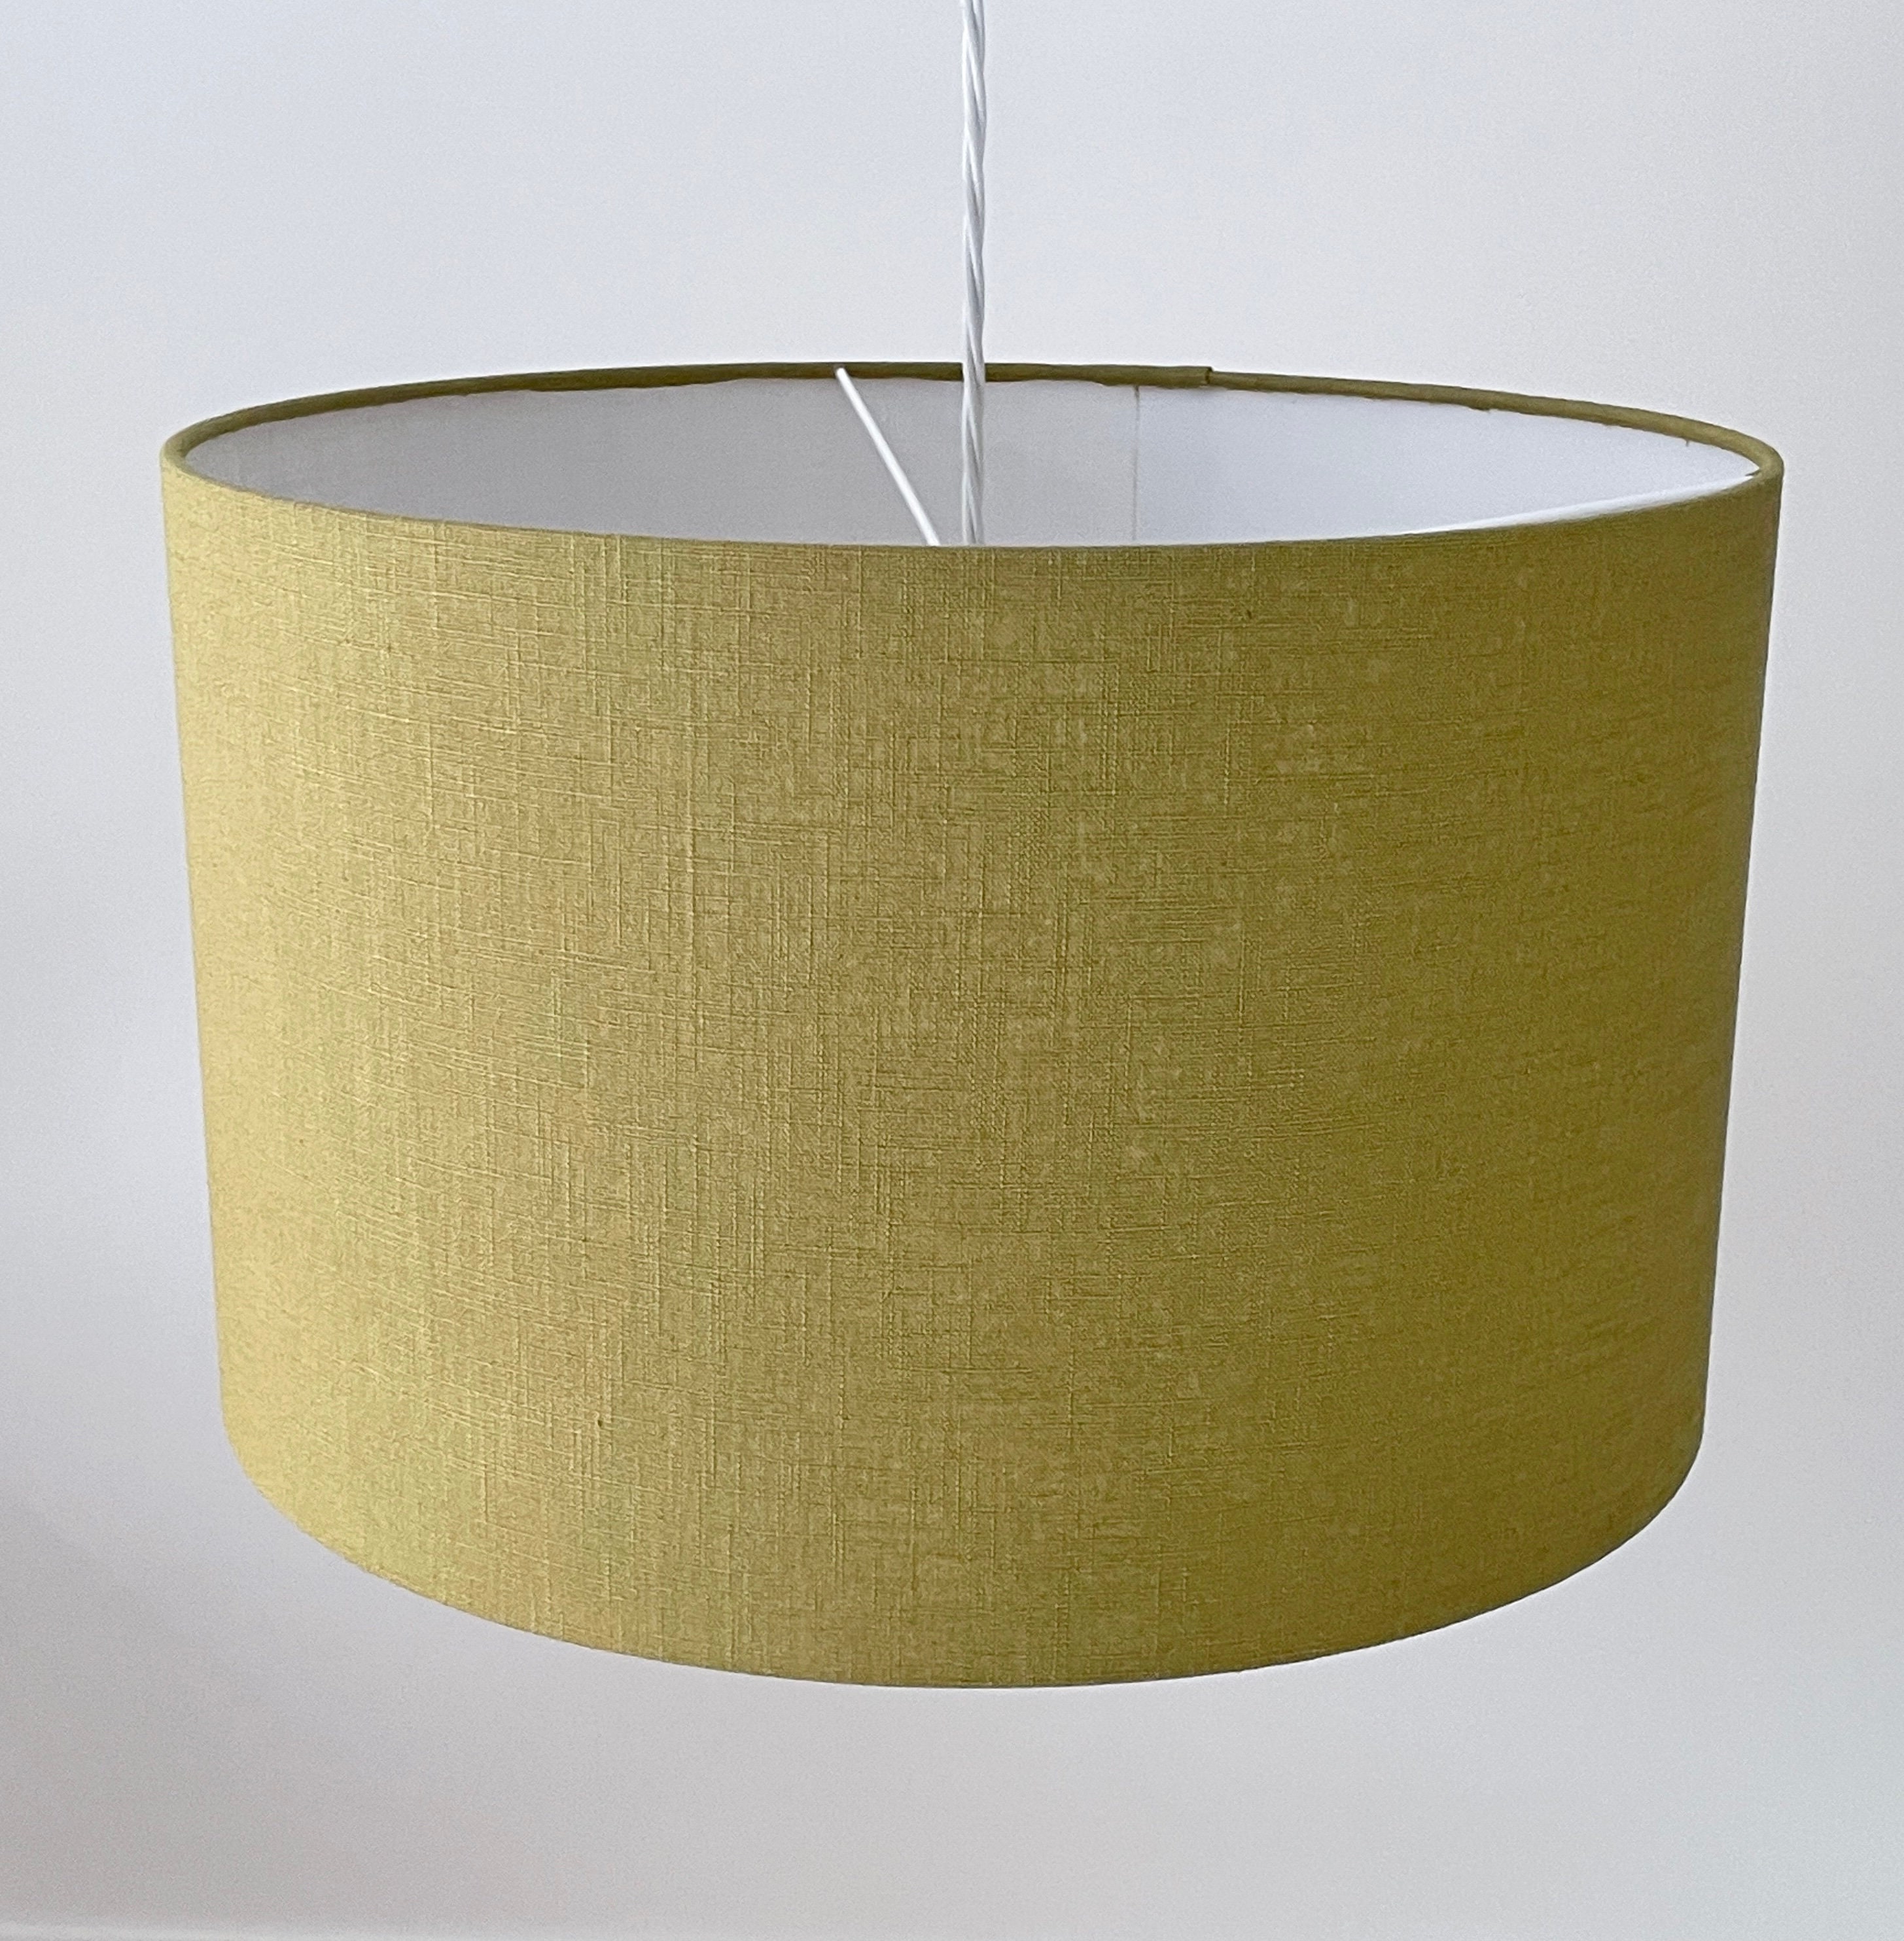 Details about   Lampshade Olive Green Textured 100% Linen Drum Light Shade 